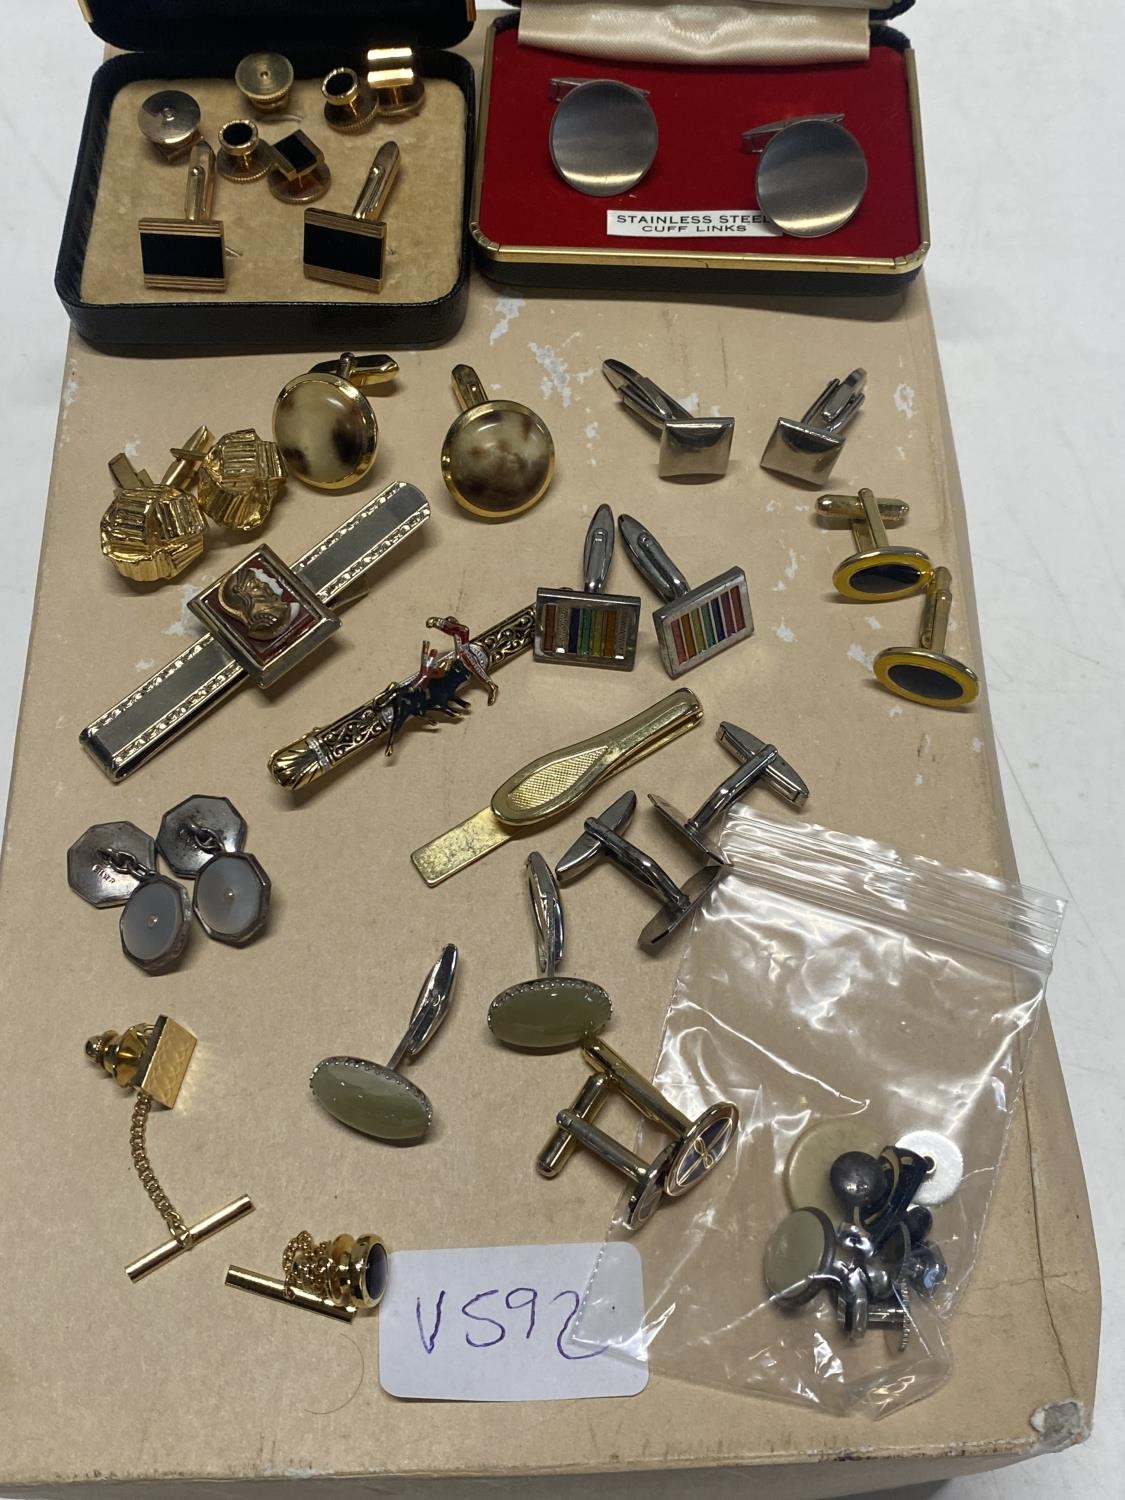 A large selection of assorted vintage cufflinks, tie clips etc